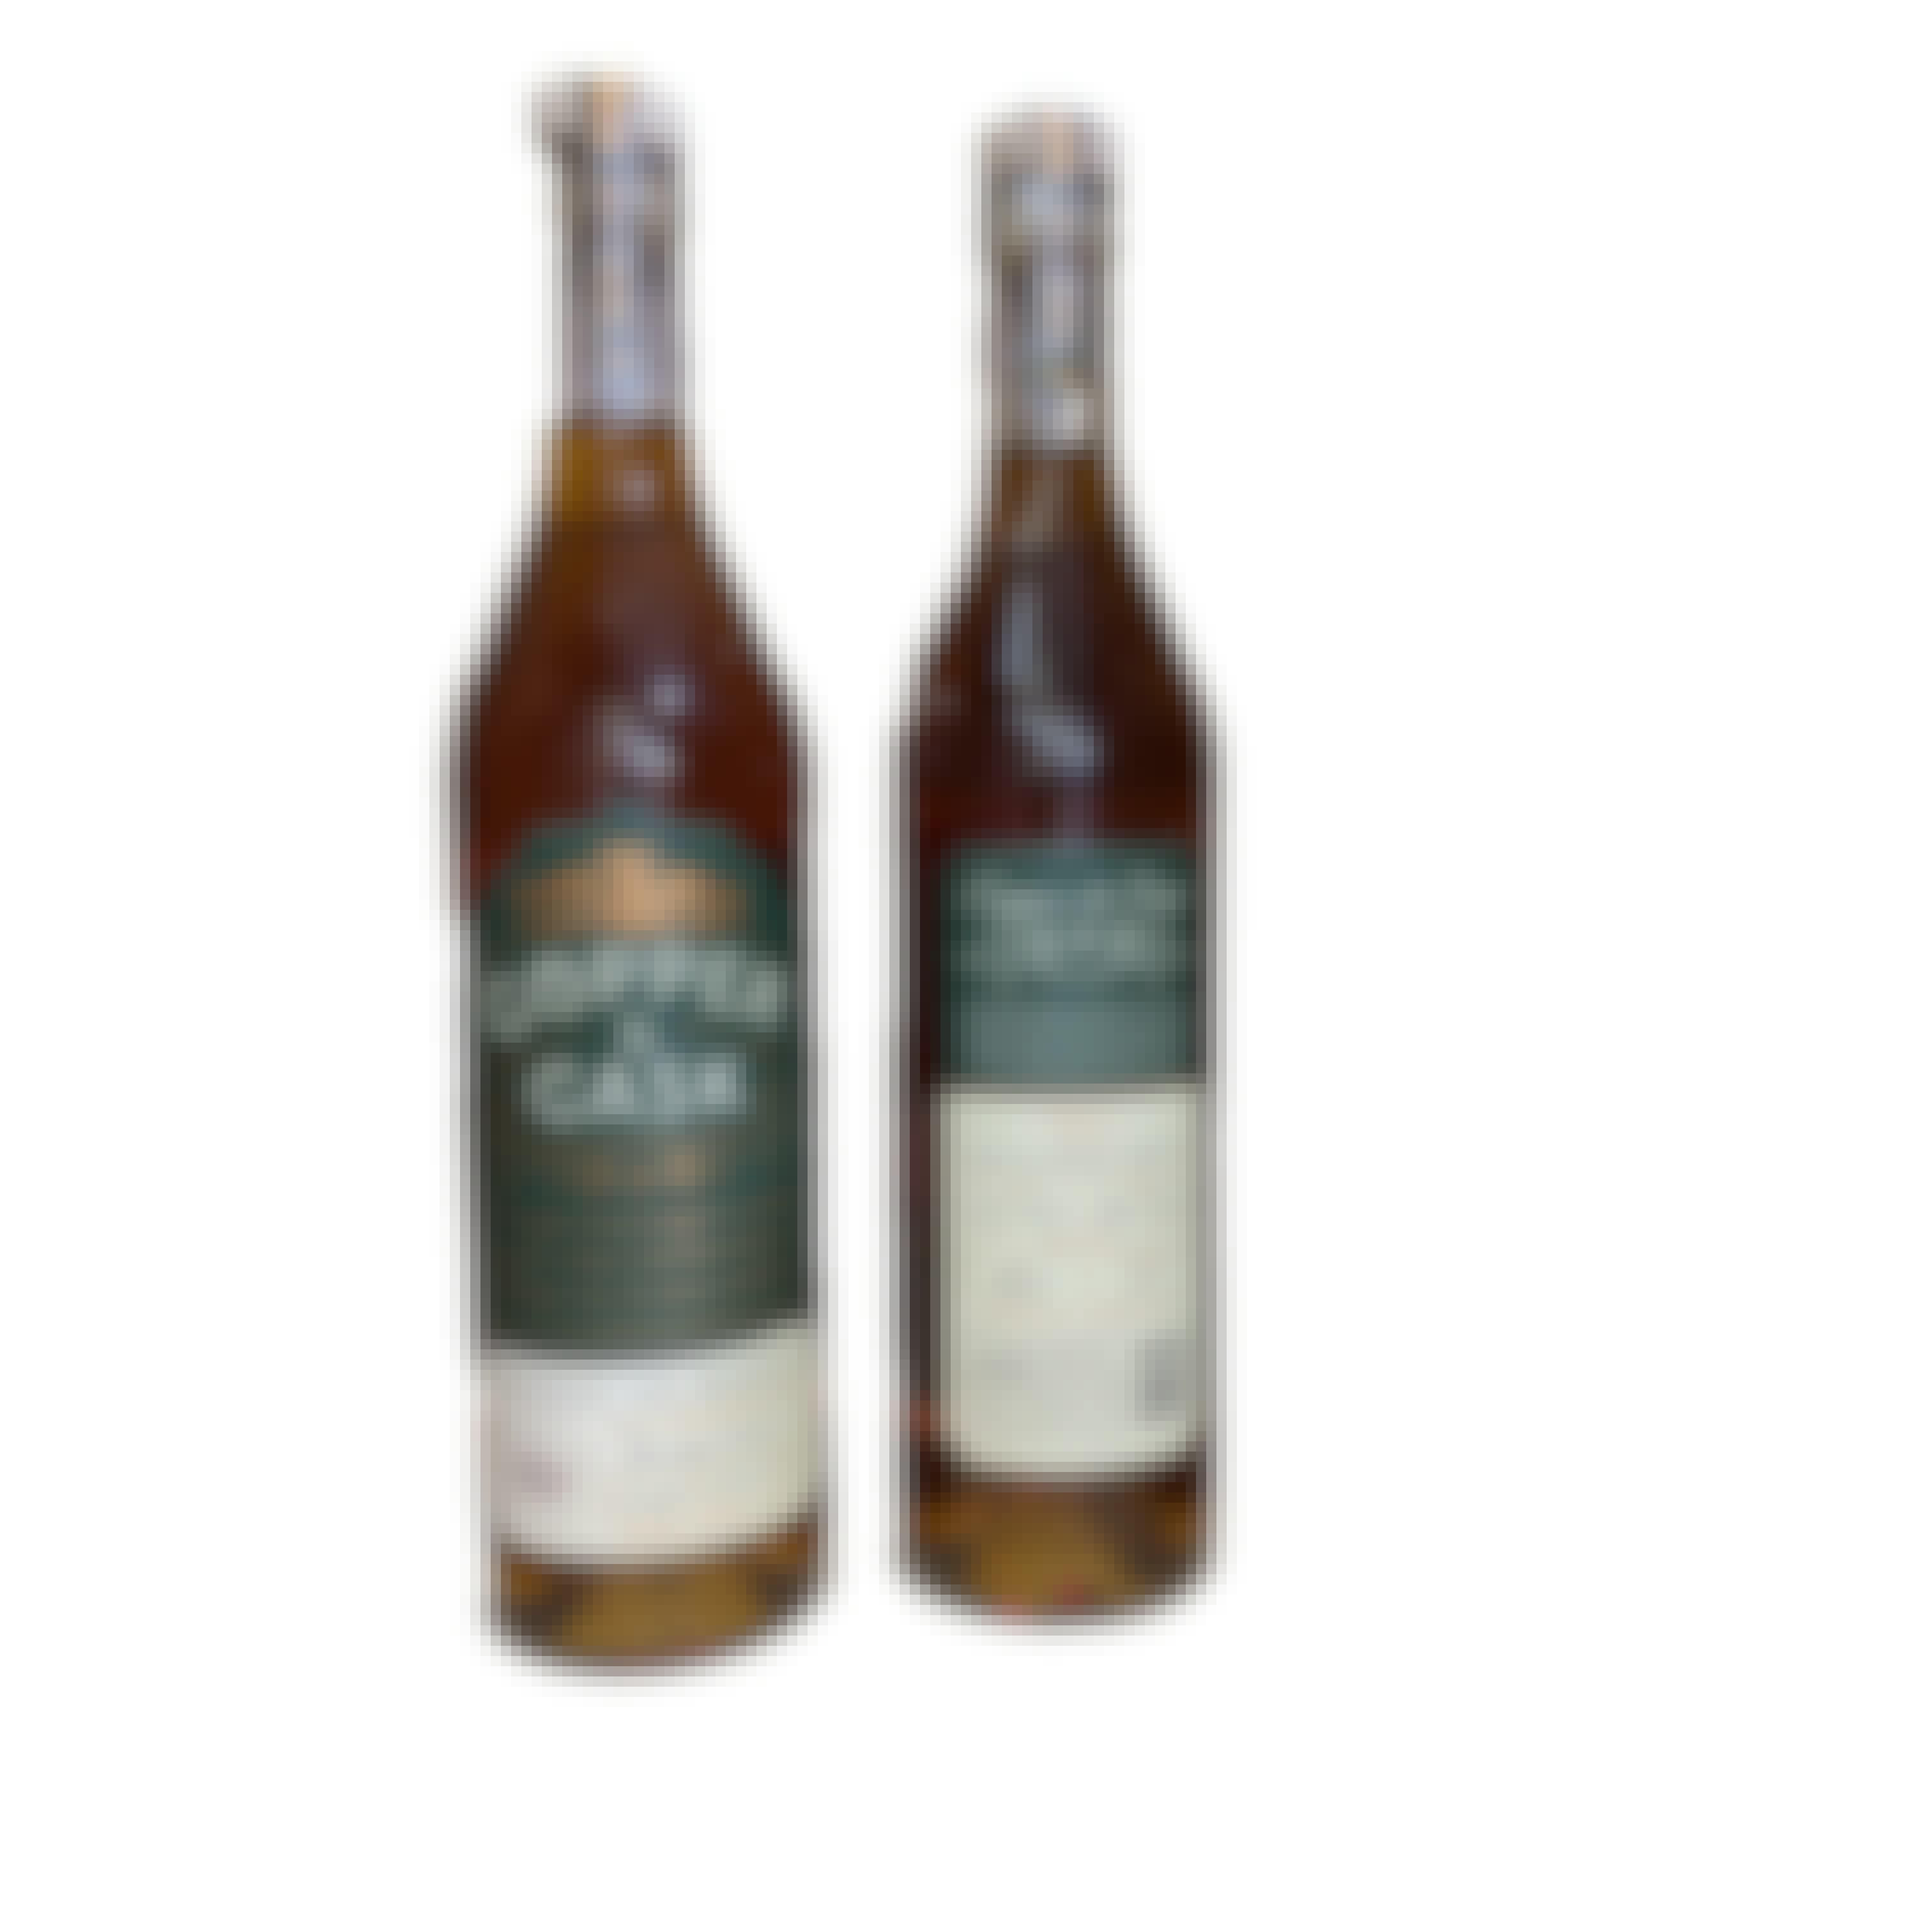 Copper and Cask "Store Pick" Double Oaked Rye Dc-416 750ml